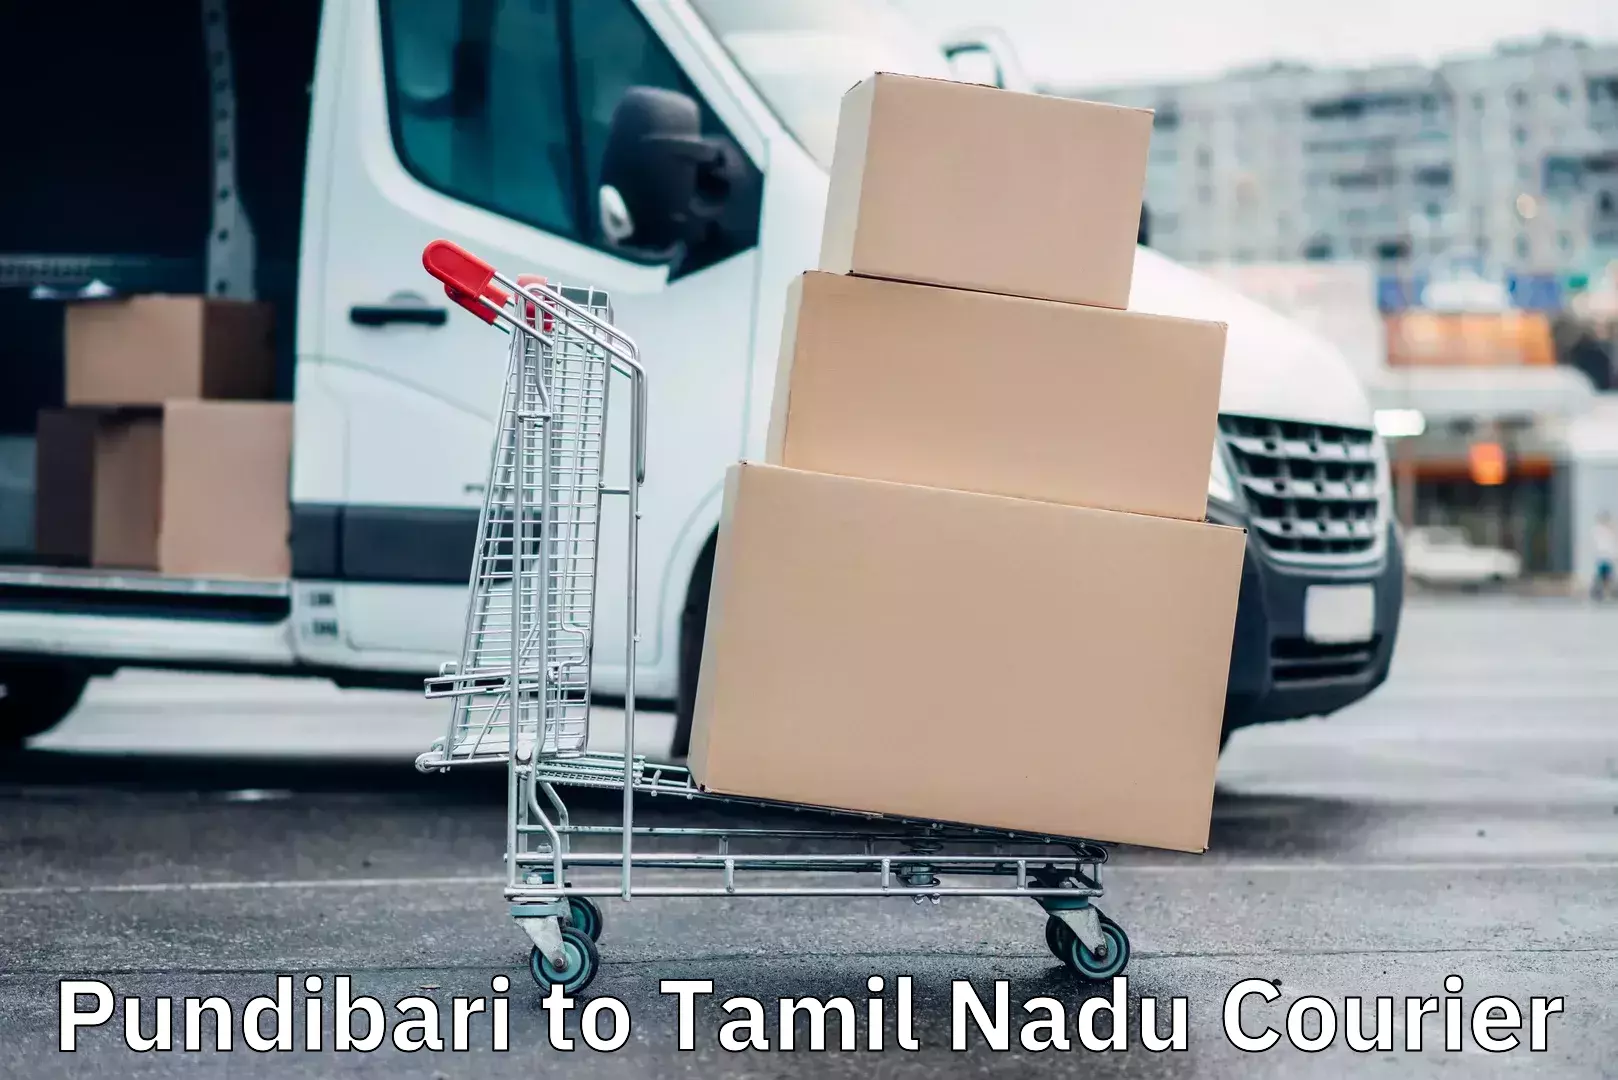 Overnight delivery services Pundibari to Tamil Nadu